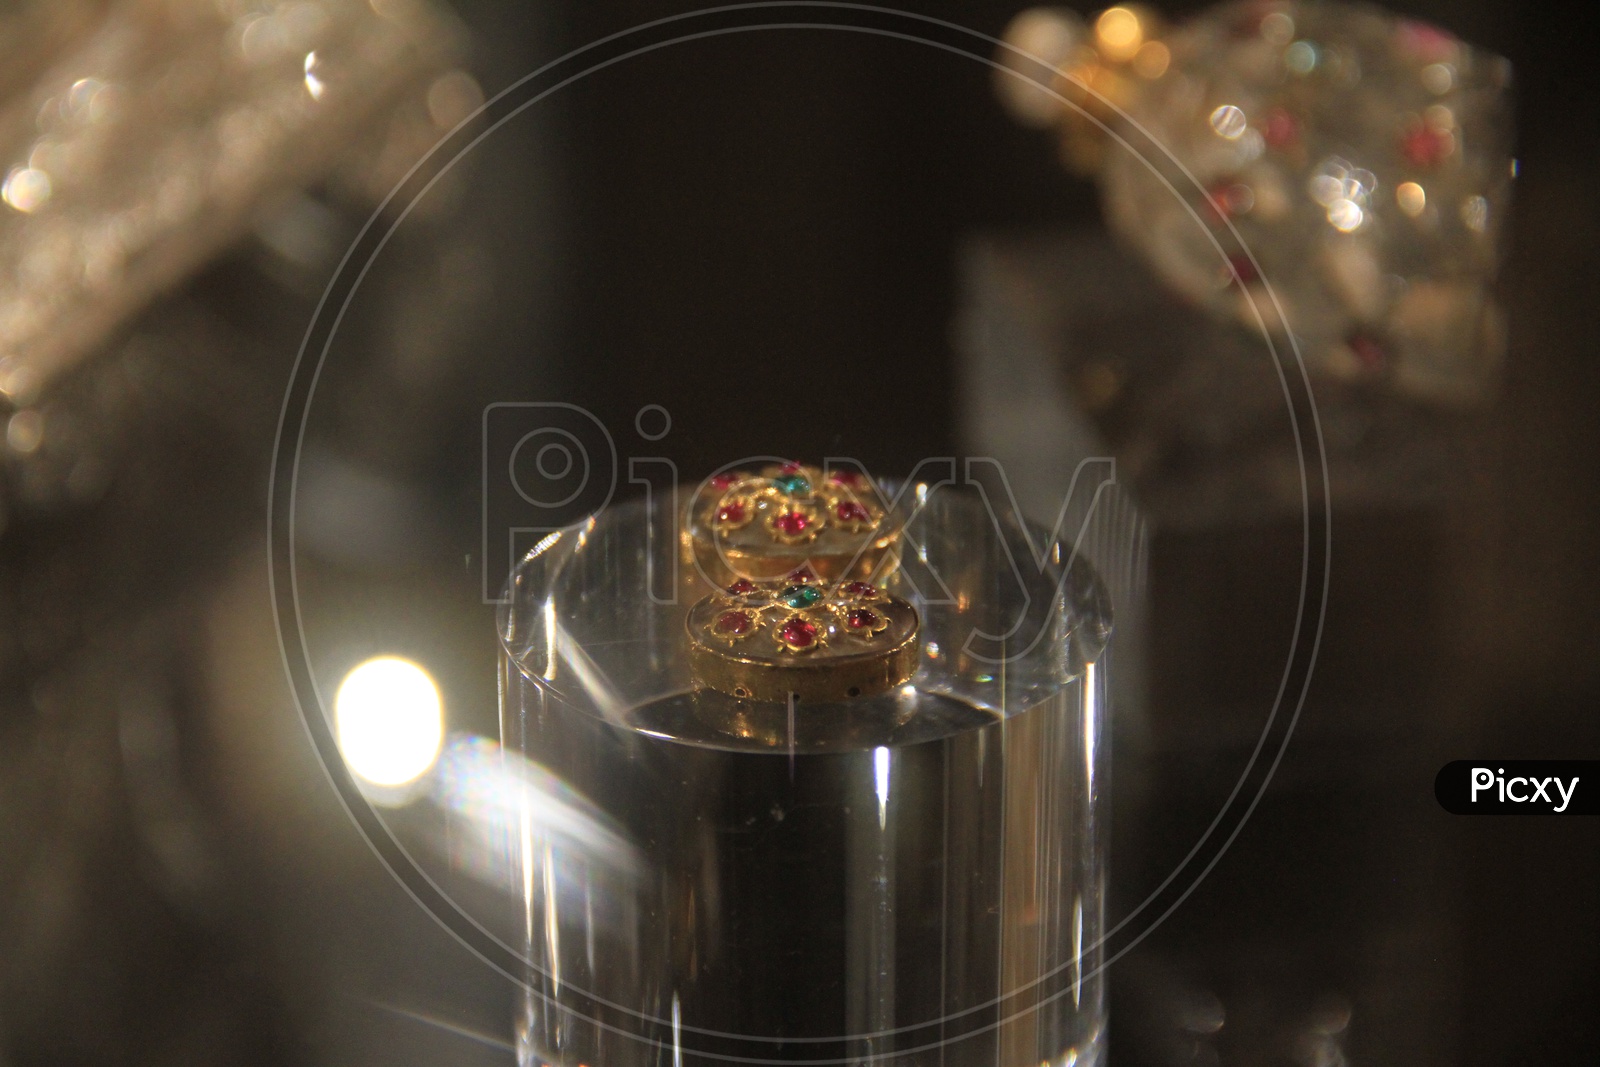 Gold Jewelery in a Display